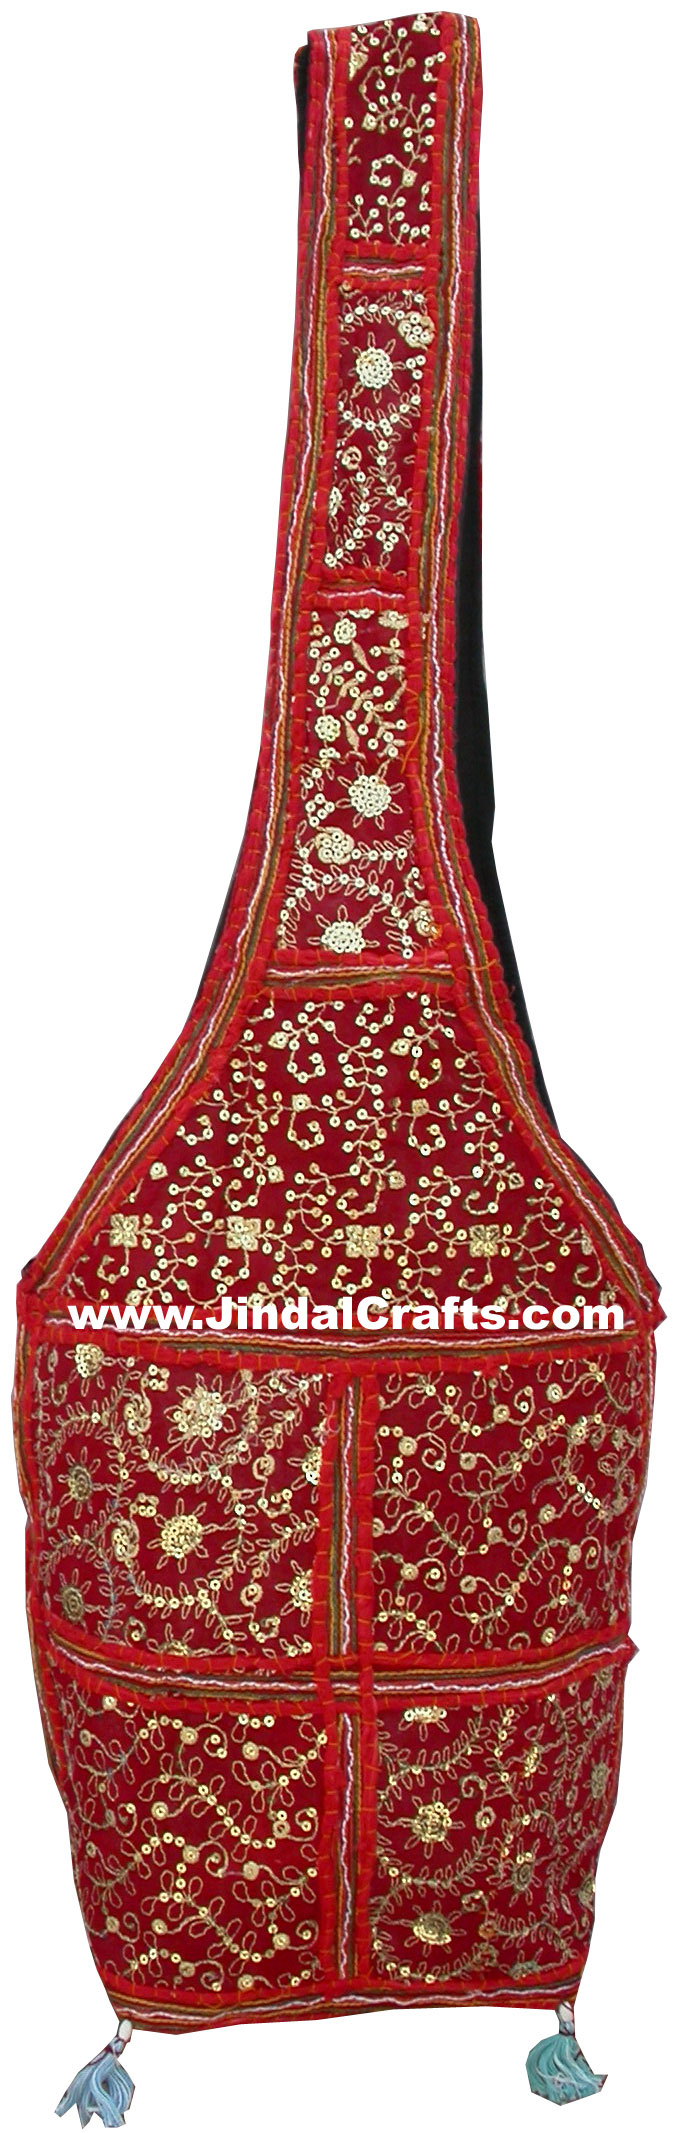 Colourful Hand Embroidered Gypsy Handbag from India 100 % Cotton Fabric Arts